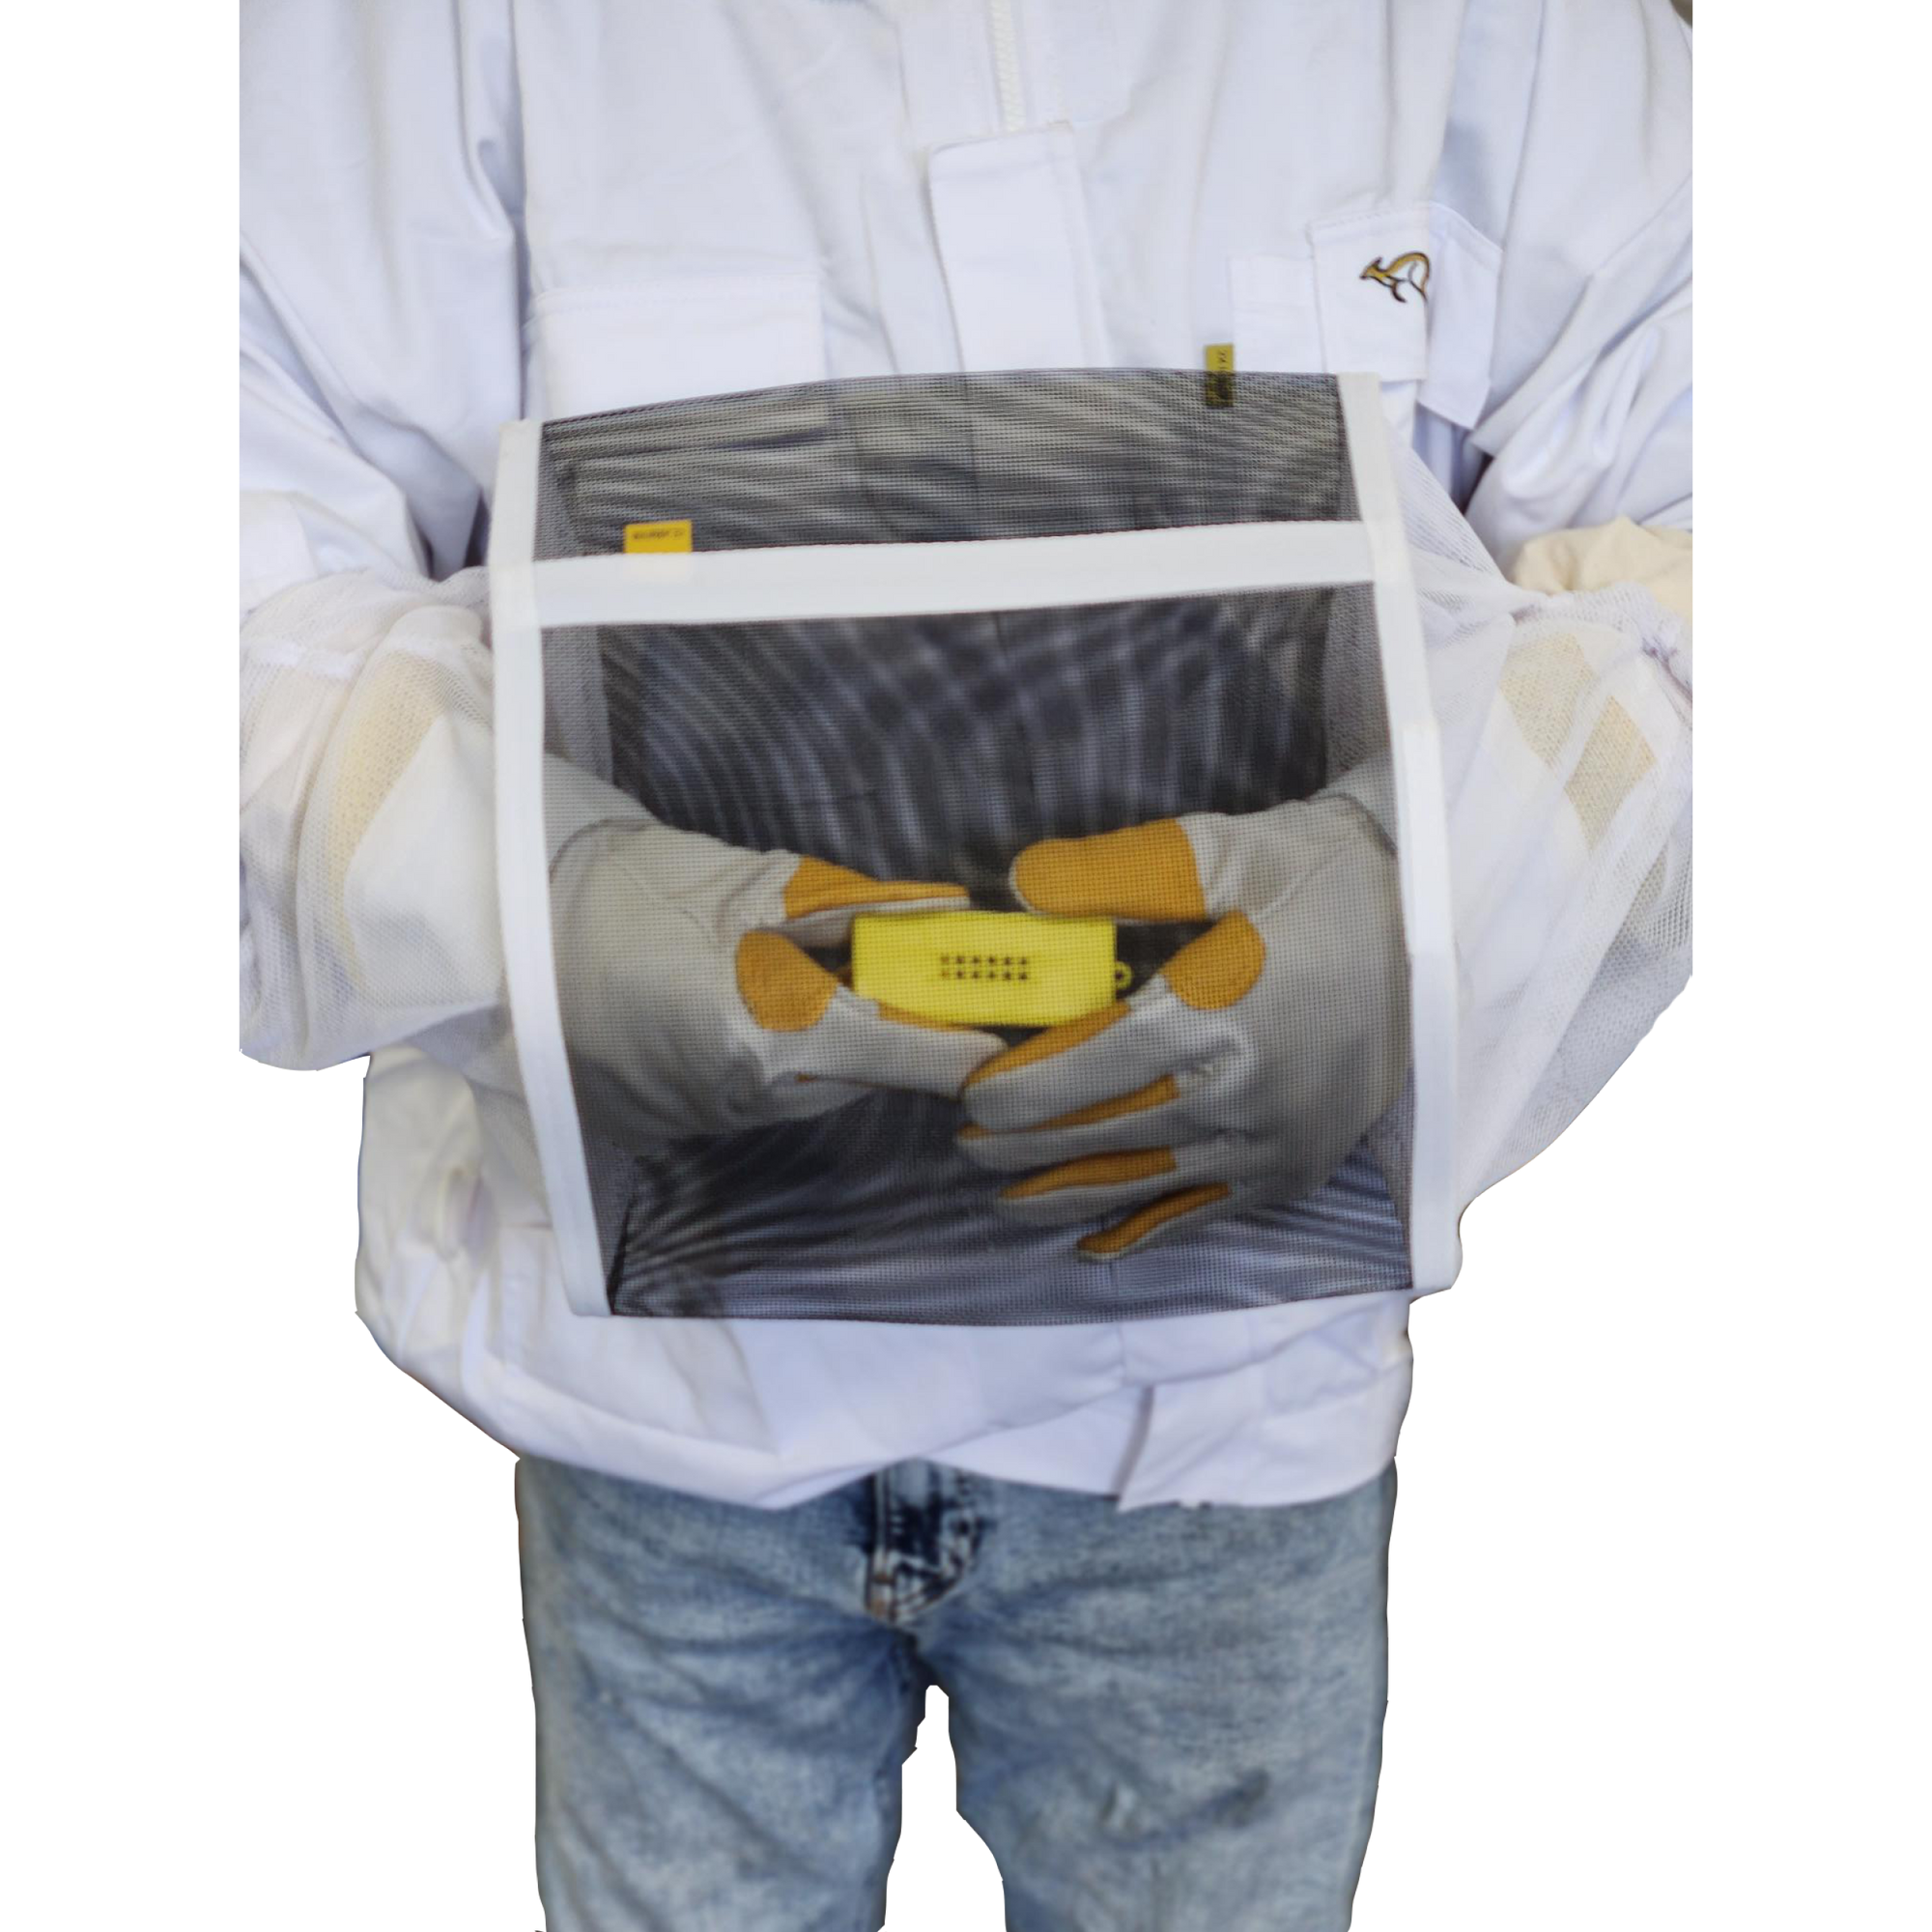 A beekeeper's hands wearing a cozy Queen Bee Muff with adjustable straps, designed to provide warmth and comfort during hive inspections.